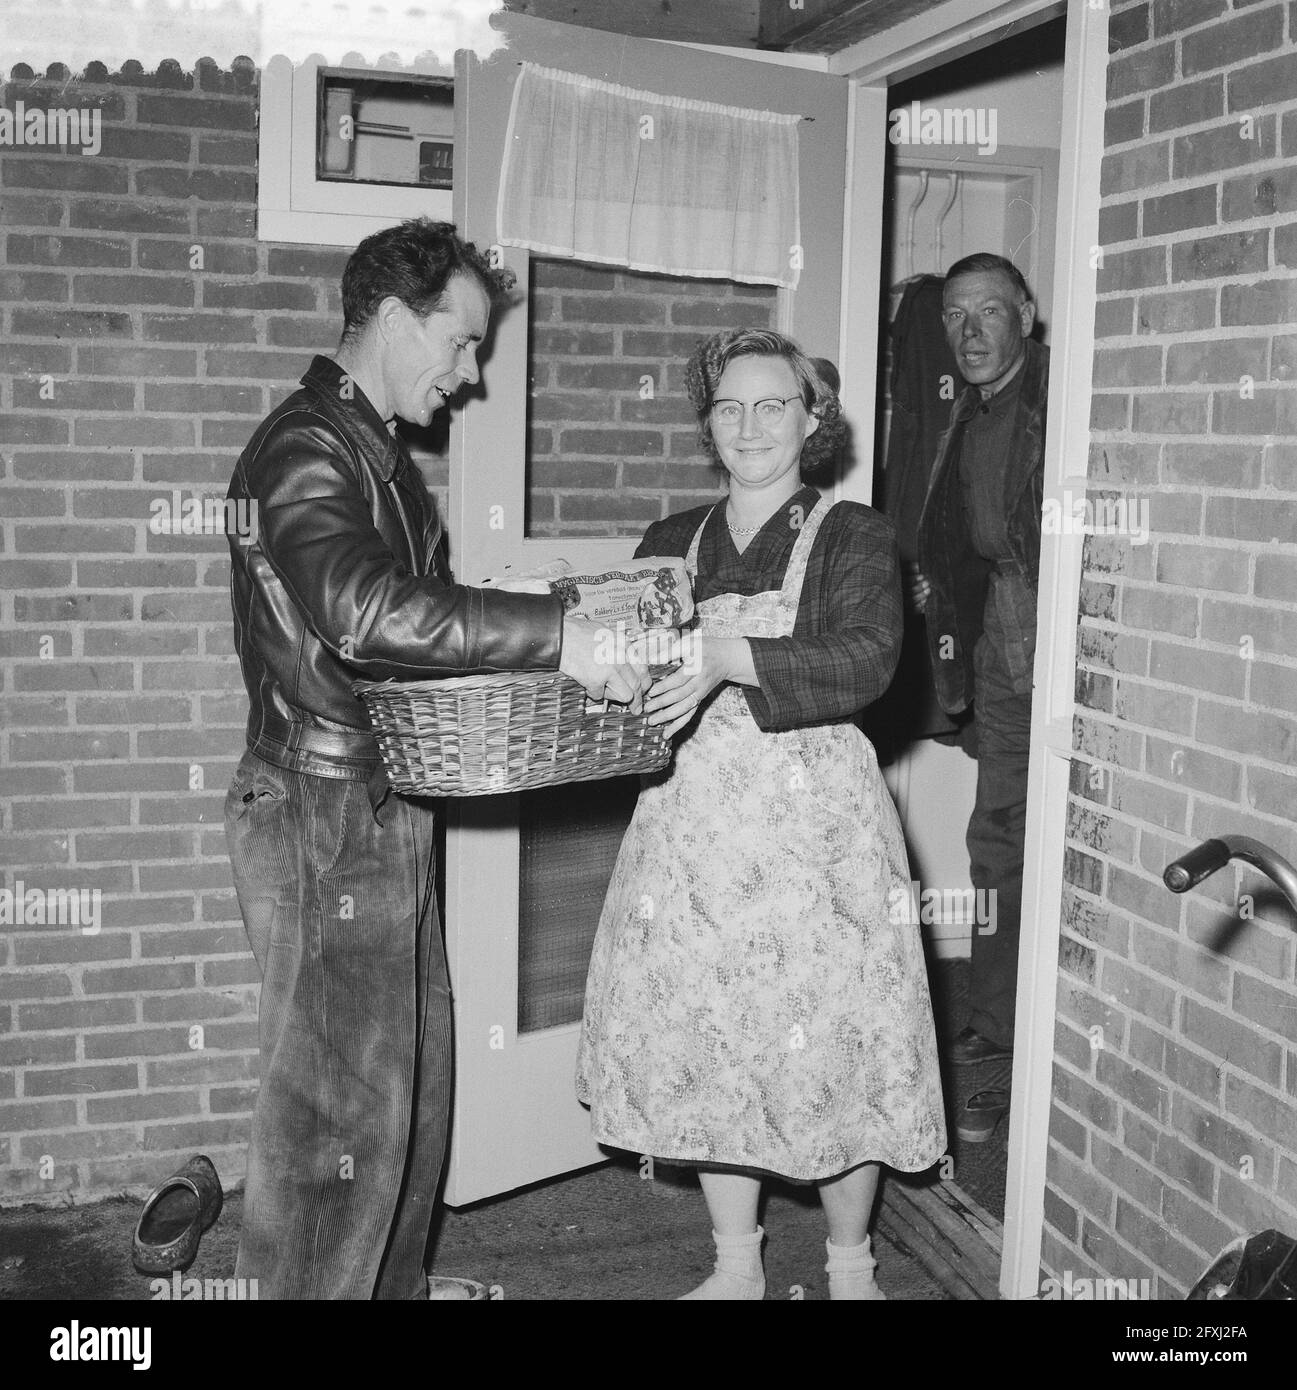 Winner of the KNVB pool, baker's boy Gerrit Zwiggelaar in Klazienaveen. He continues to deliver the bread, 10 November 1959, games of chance, winners, The Netherlands, 20th century press agency photo, news to remember, documentary, historic photography 1945-1990, visual stories, human history of the Twentieth Century, capturing moments in time Stock Photo